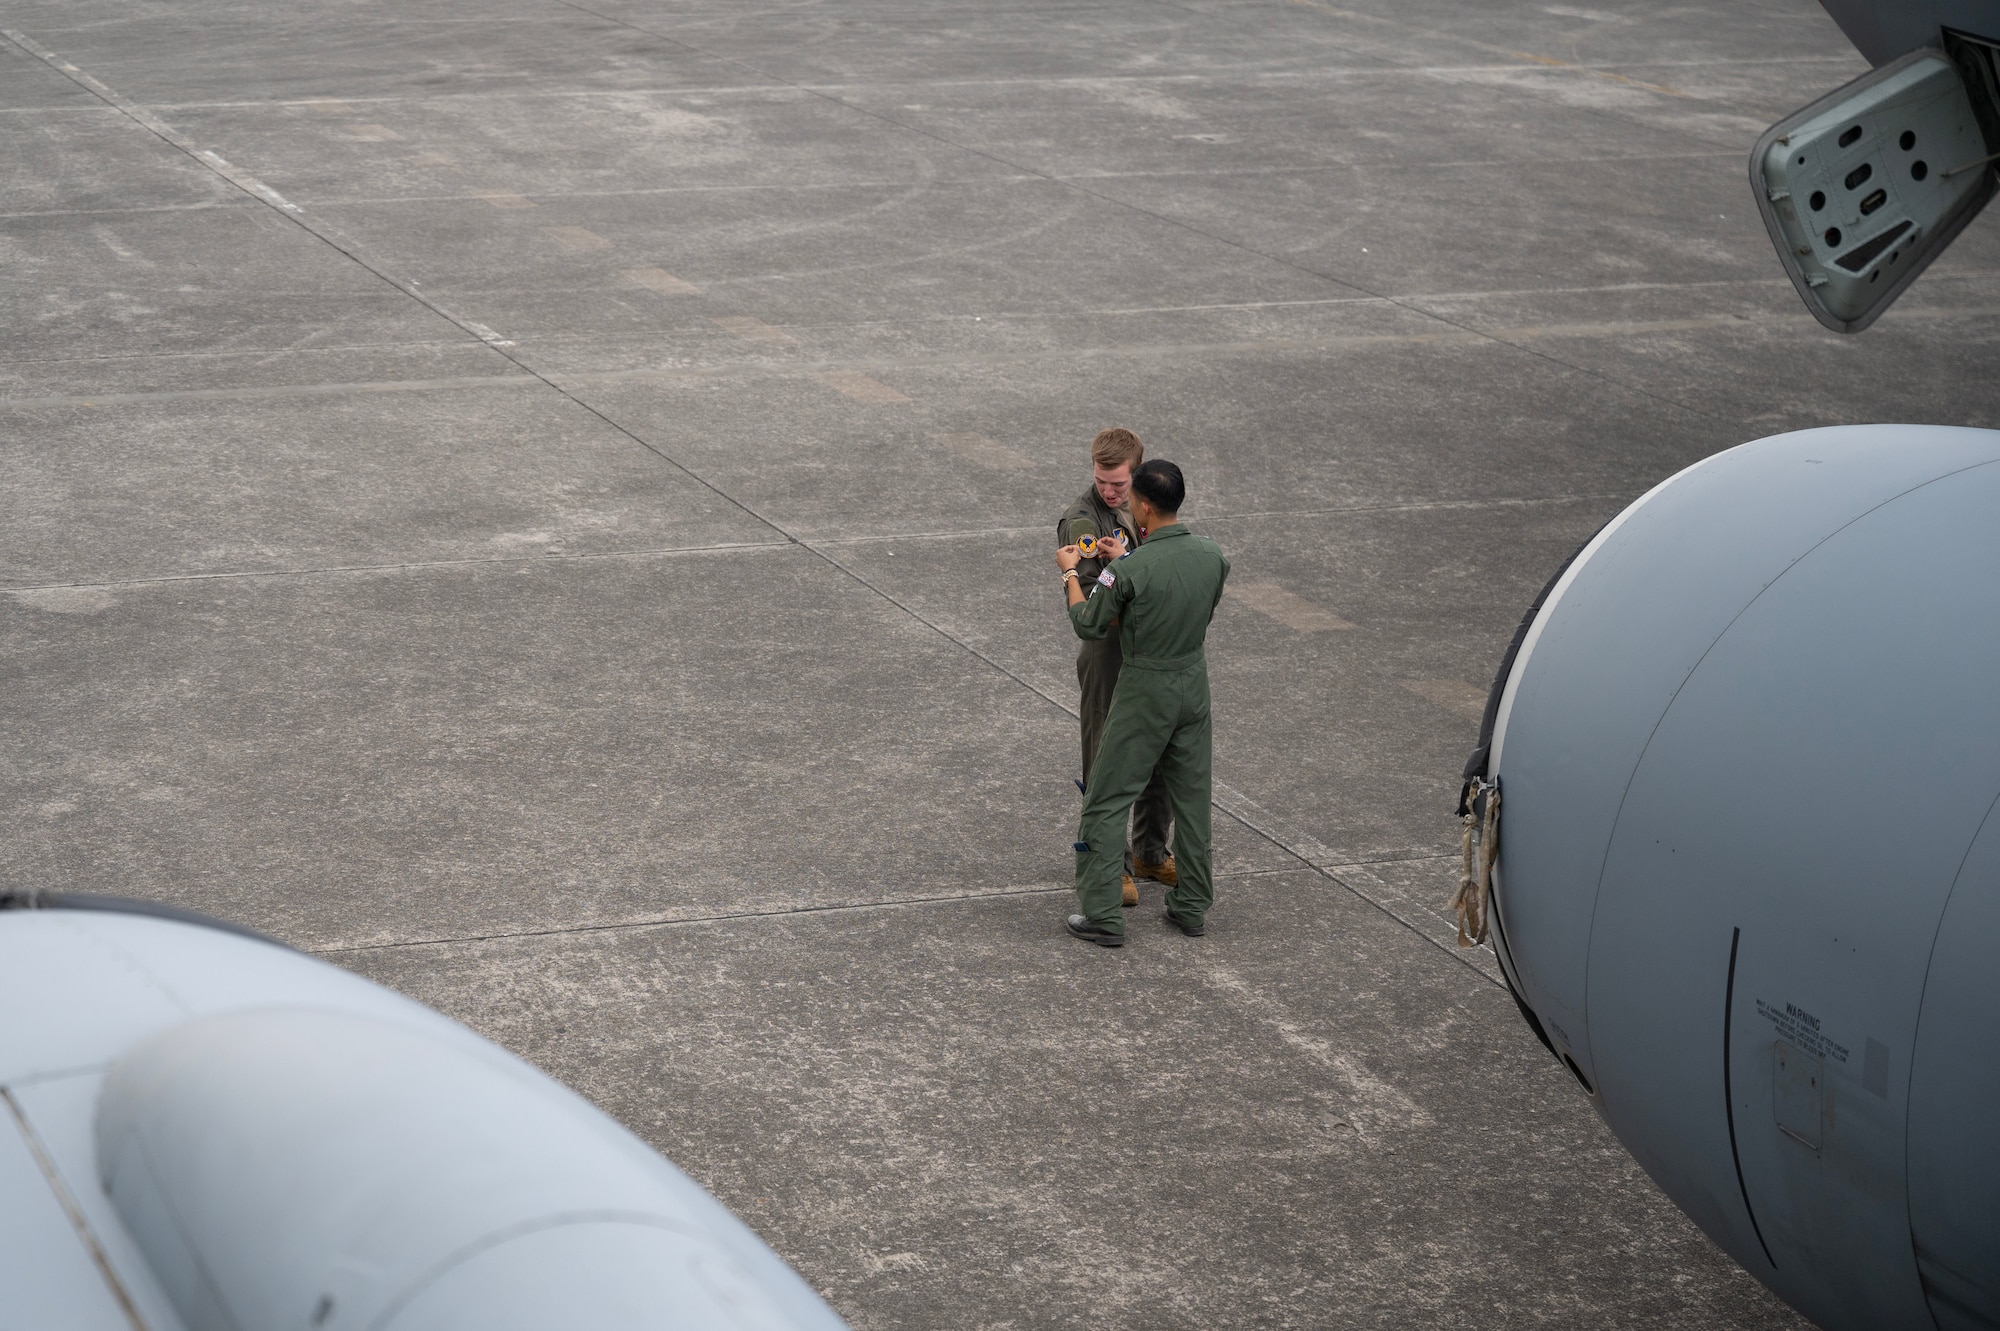 U.S. Air Force 1st Lt. Samuel Bishop, 909th Air Refueling Squadron KC-135 Stratotanker pilot, swaps patches with a Philippine Air Force pilot at Clark Air Base, Philippines, March 13, 2023. The exchanging of patches is a long-standing military tradition and a symbolic gesture of respect and camaraderie. (U.S. Air Force photo by Senior Airman Jessi Roth)